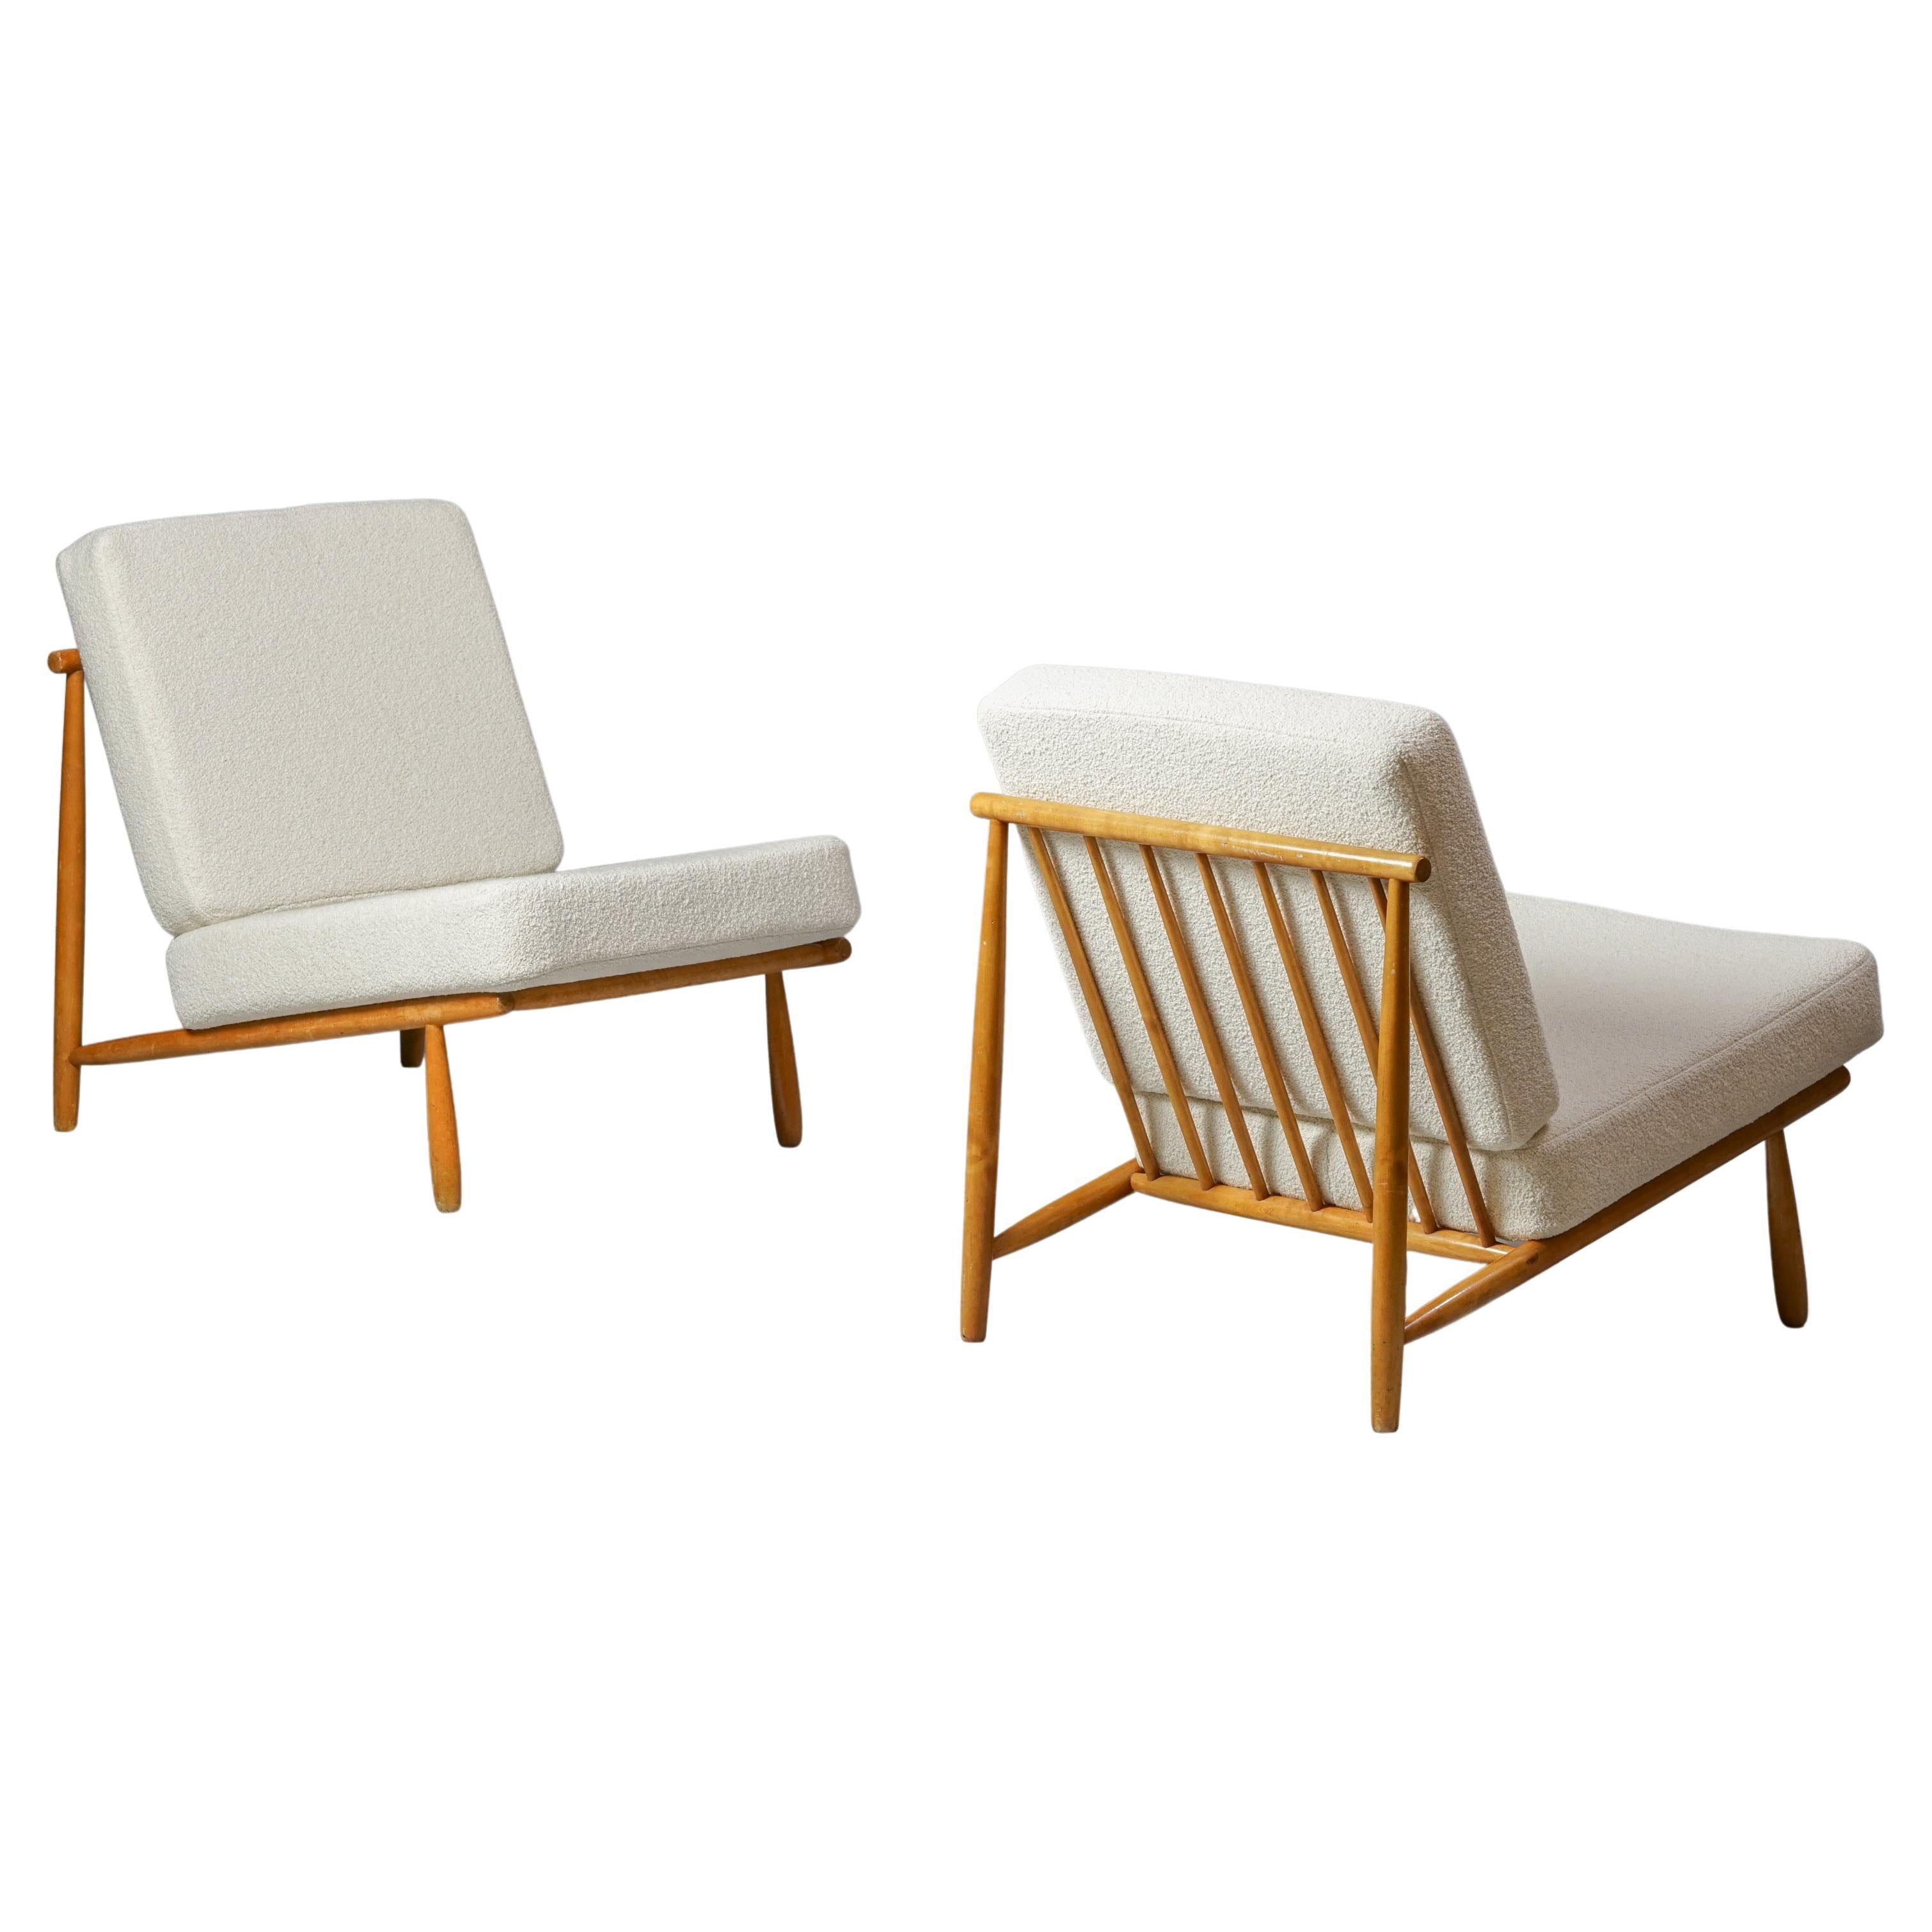 Pair of Model "Interior" Lounge Chairs by Alf Svensson for Dux Sweden, 1960s